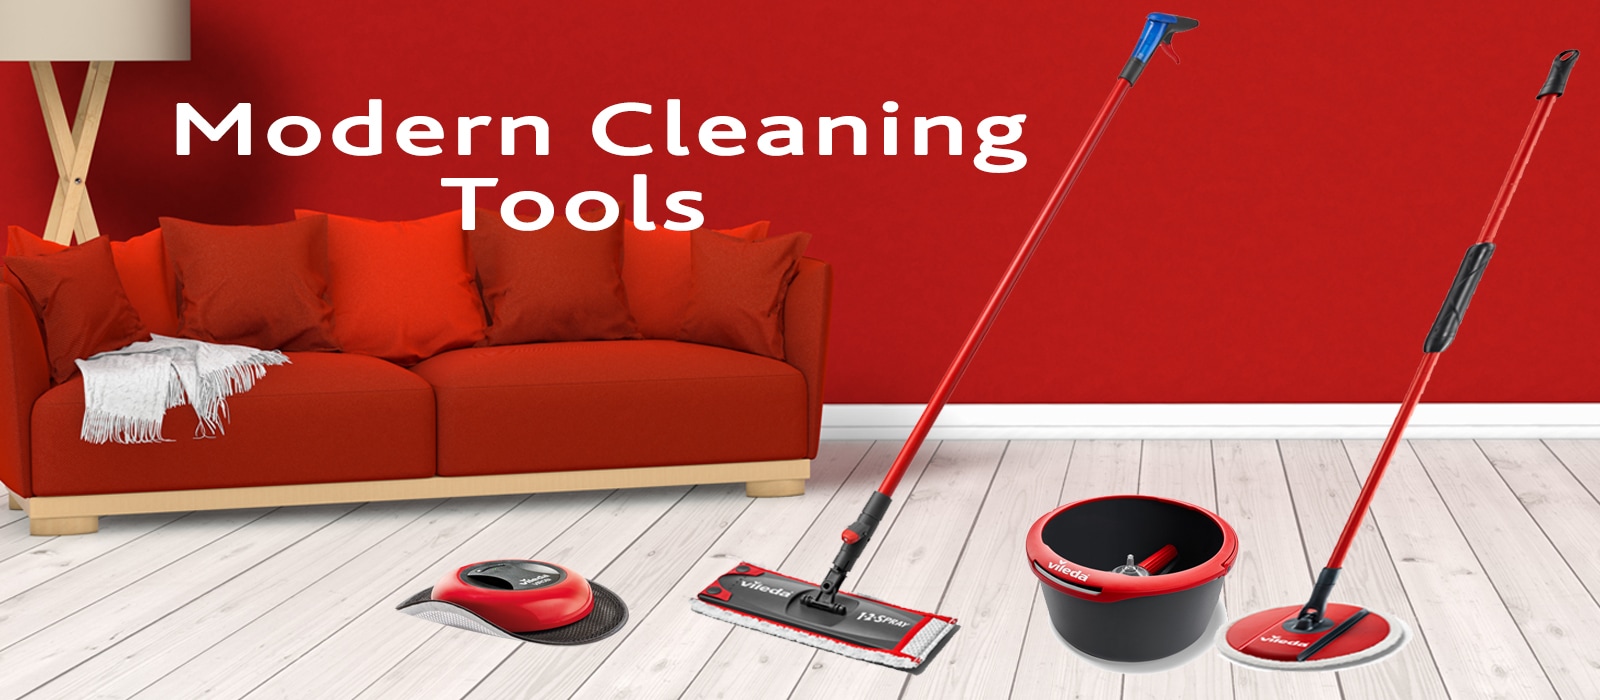 find-your-modern-cleaning-tools-here.jpg